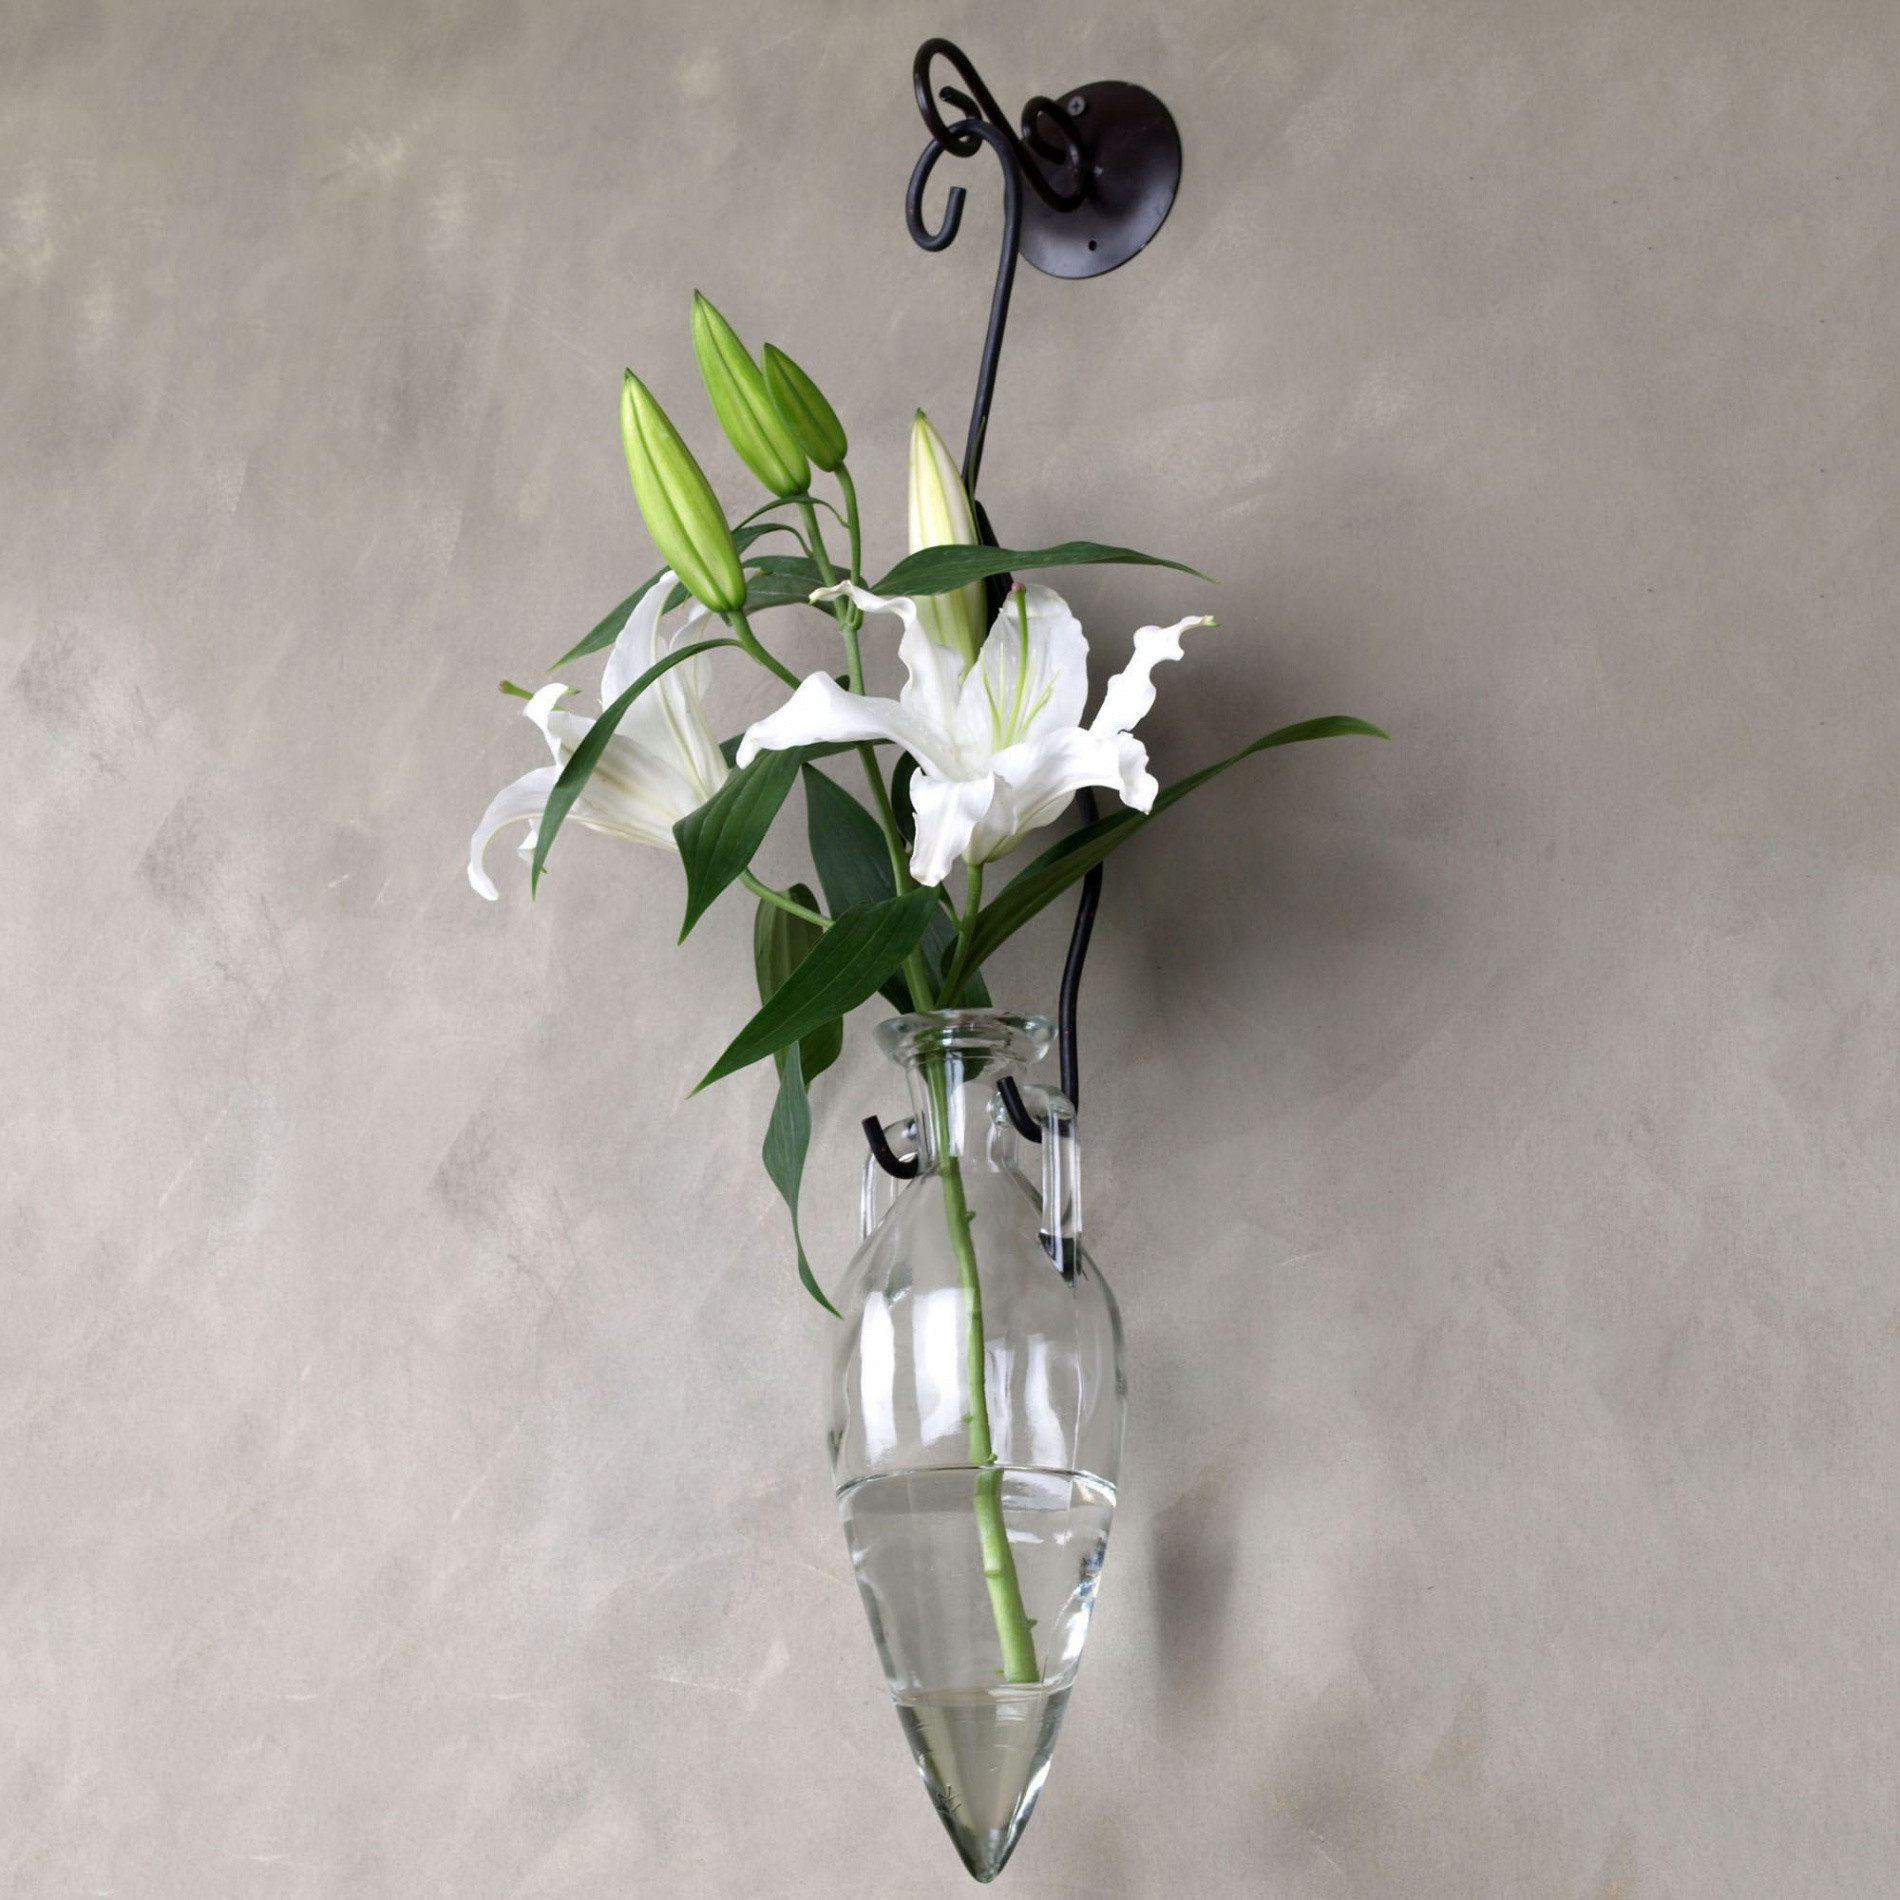 12 Stylish Large Floor Vase with Artificial Flowers 2024 free download large floor vase with artificial flowers of h vases wall hanging flower vase newspaper i 0d scheme wall scheme within h vases wall hanging flower vase newspaper i 0d scheme wall scheme vase 